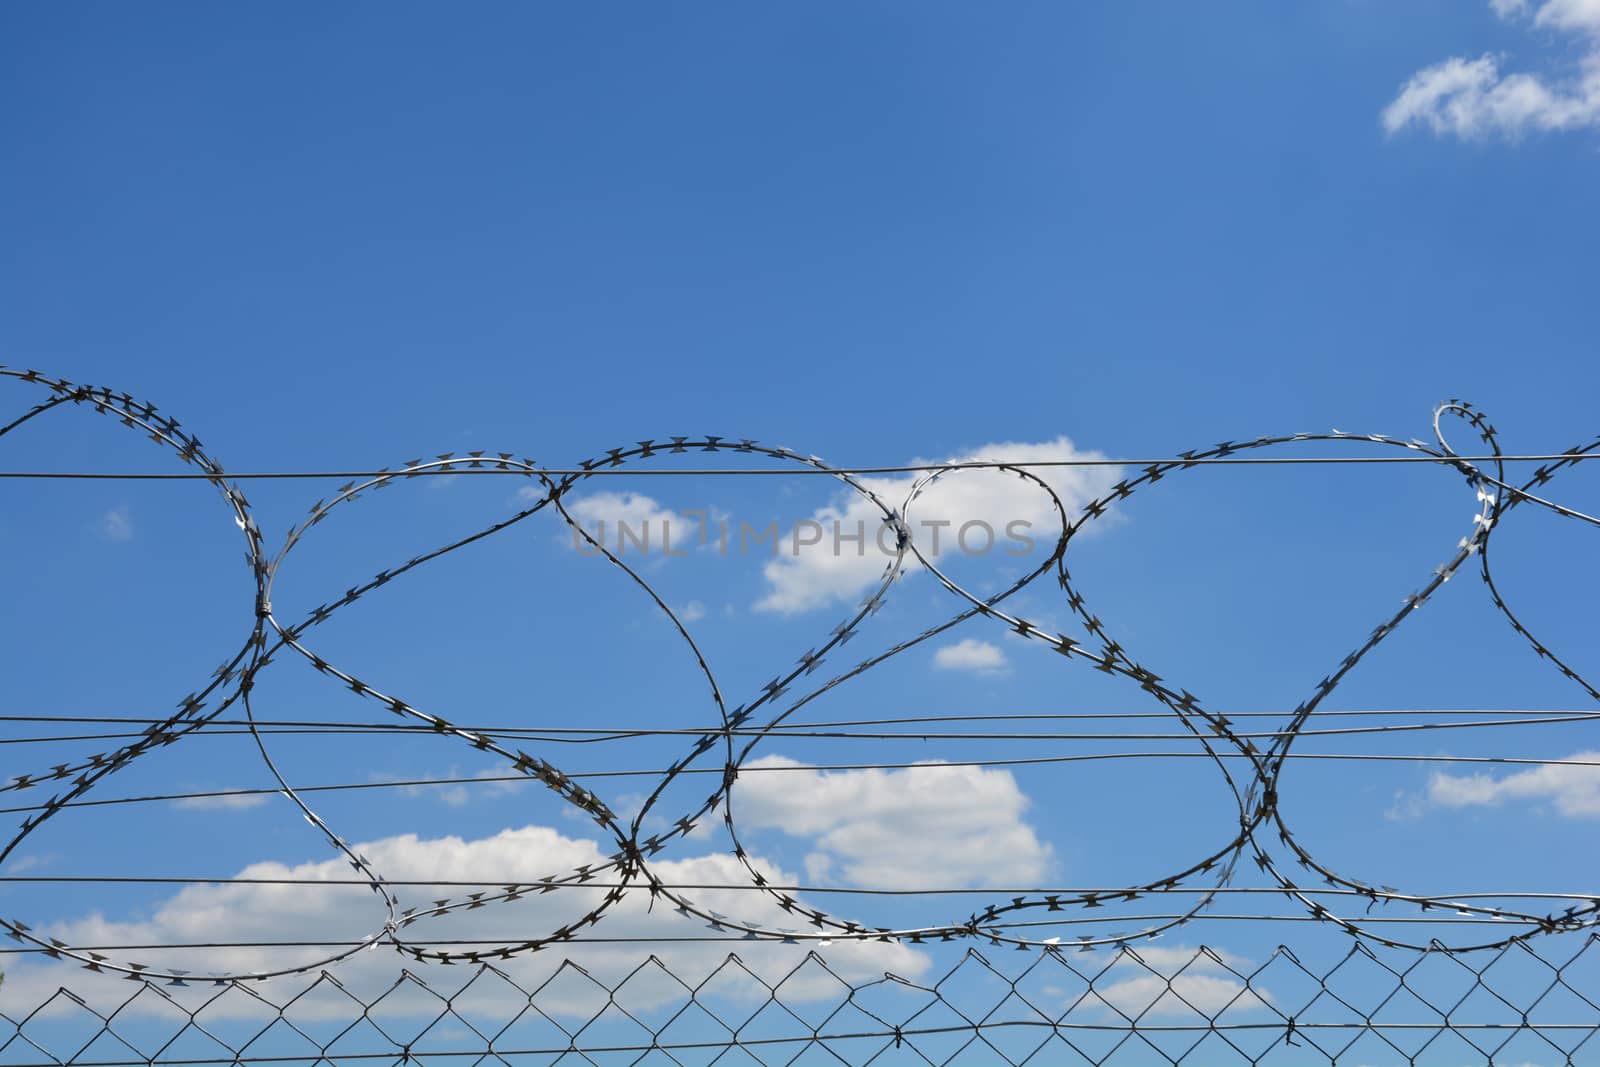 Detail of a fence with sharp edges against blue sky with clouds